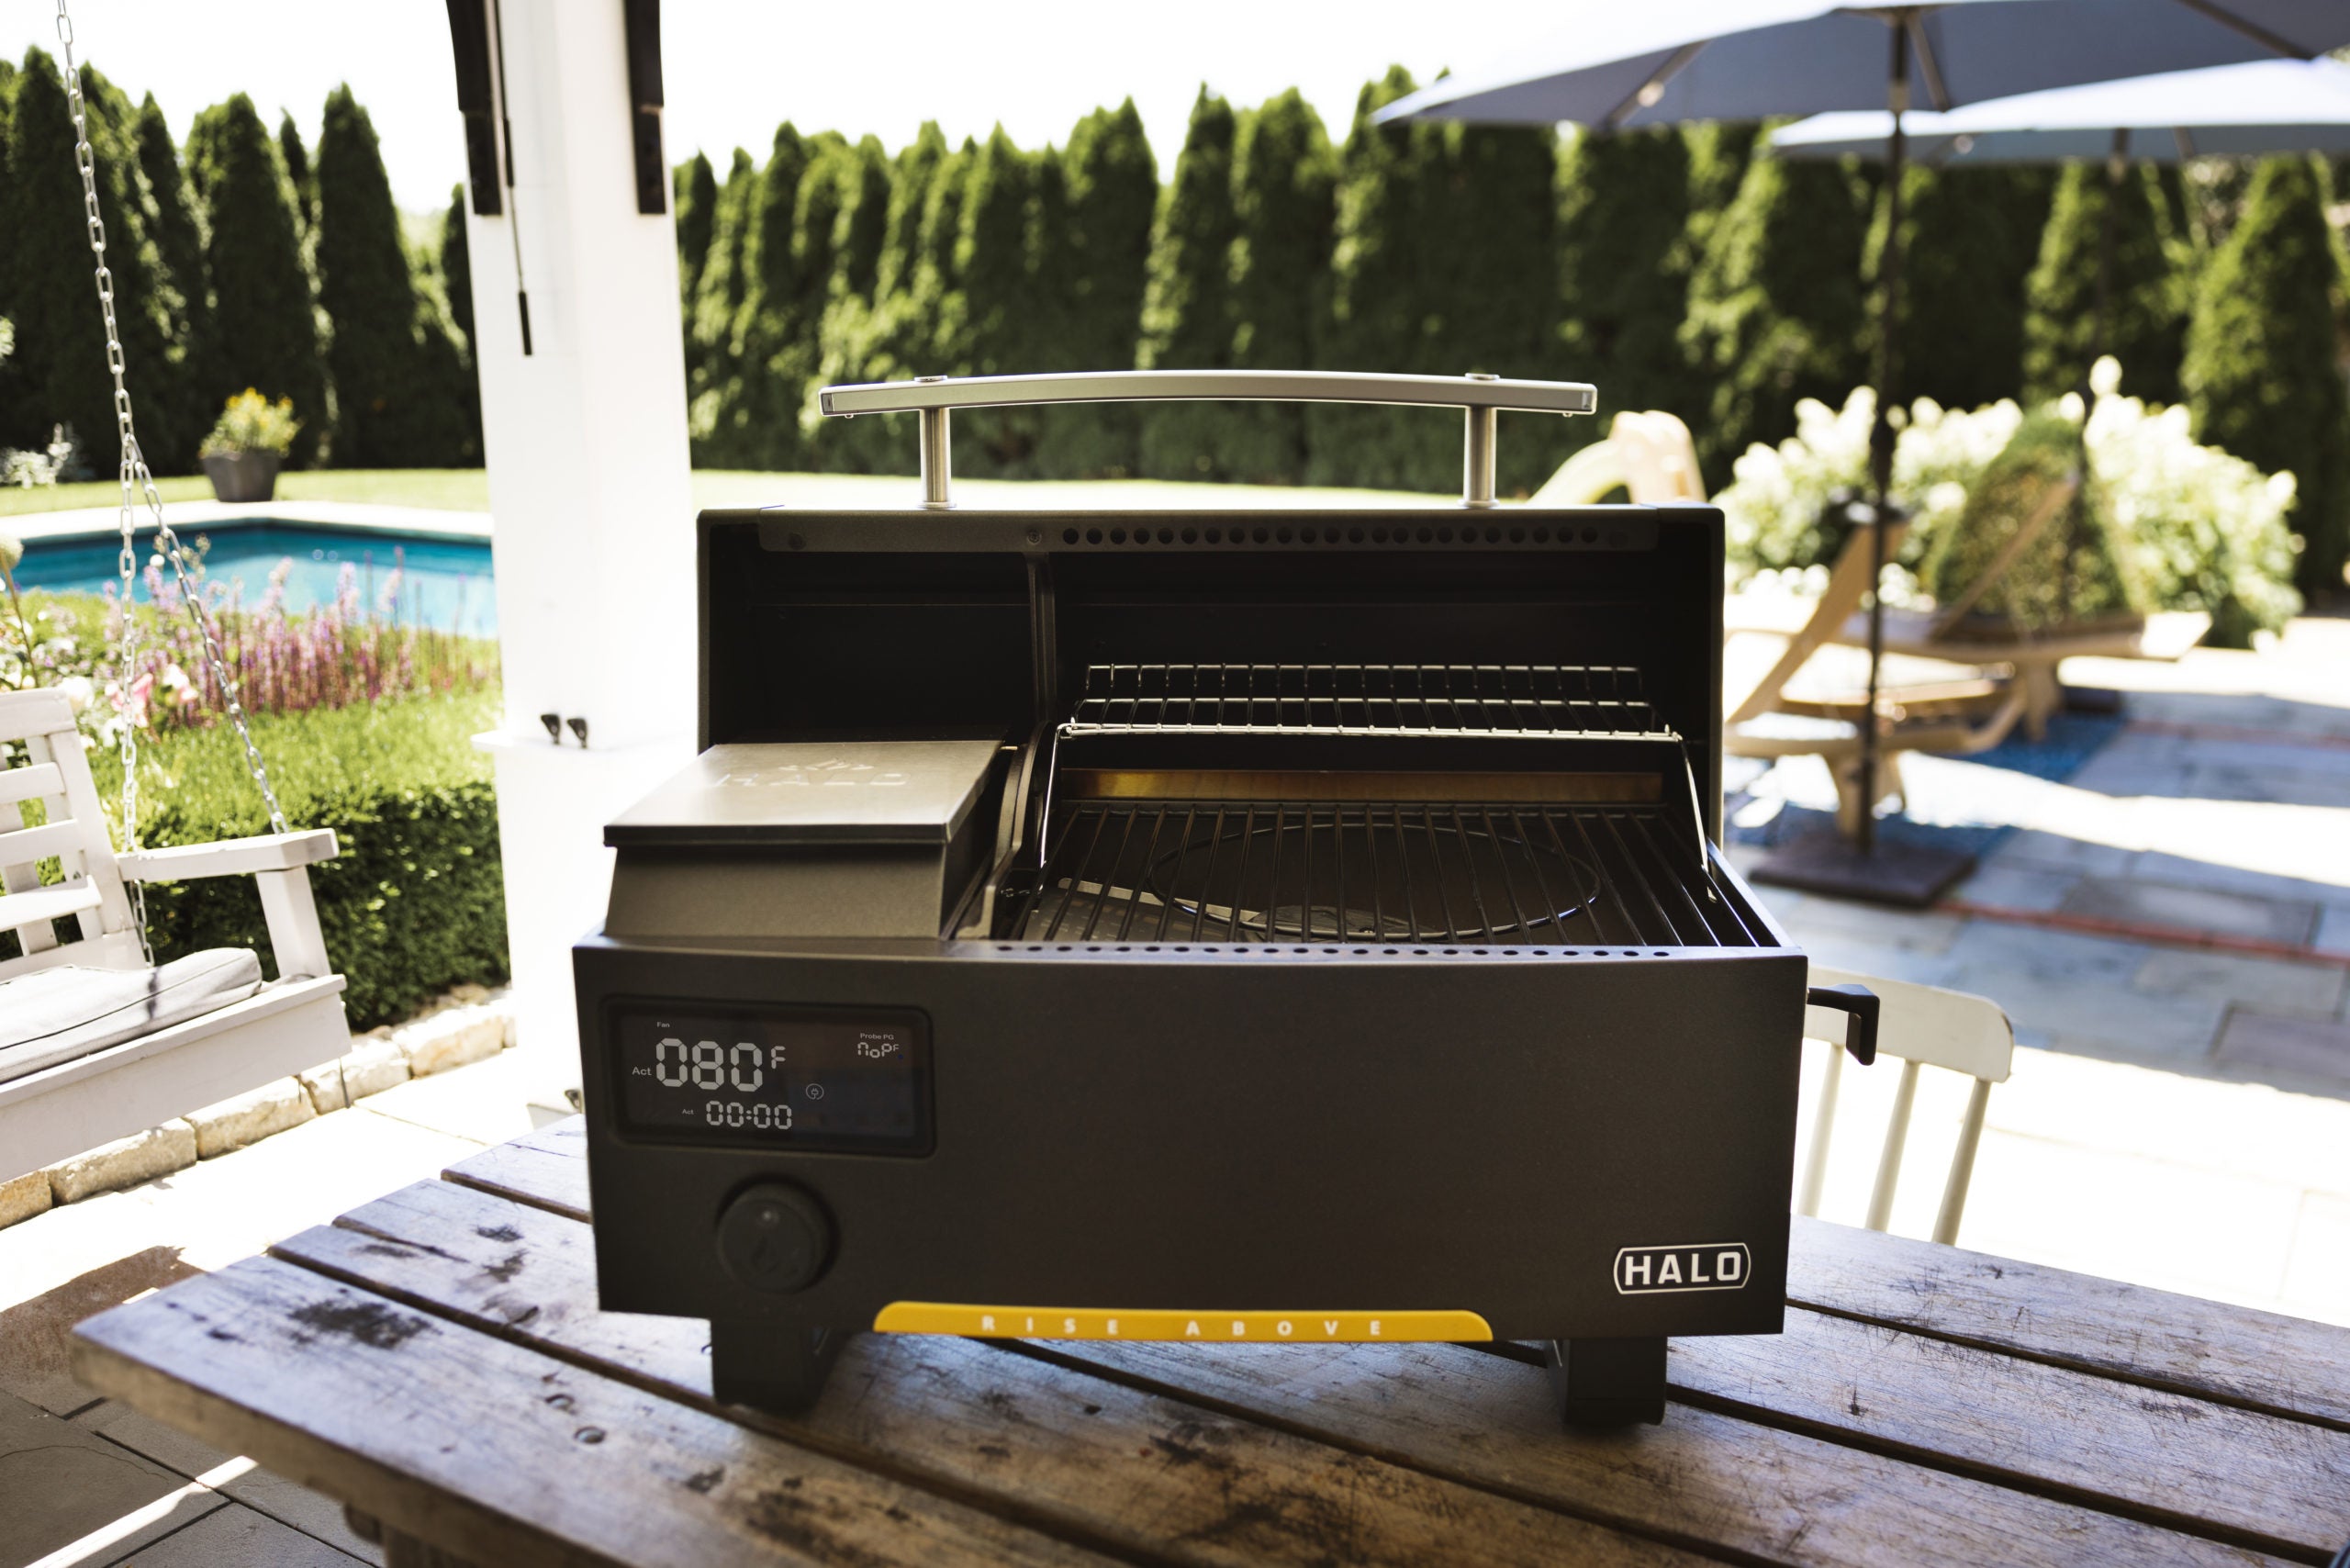 Halo Prime300 Countertop Pellet Grill Lifestyle on the Top of the Wood Table